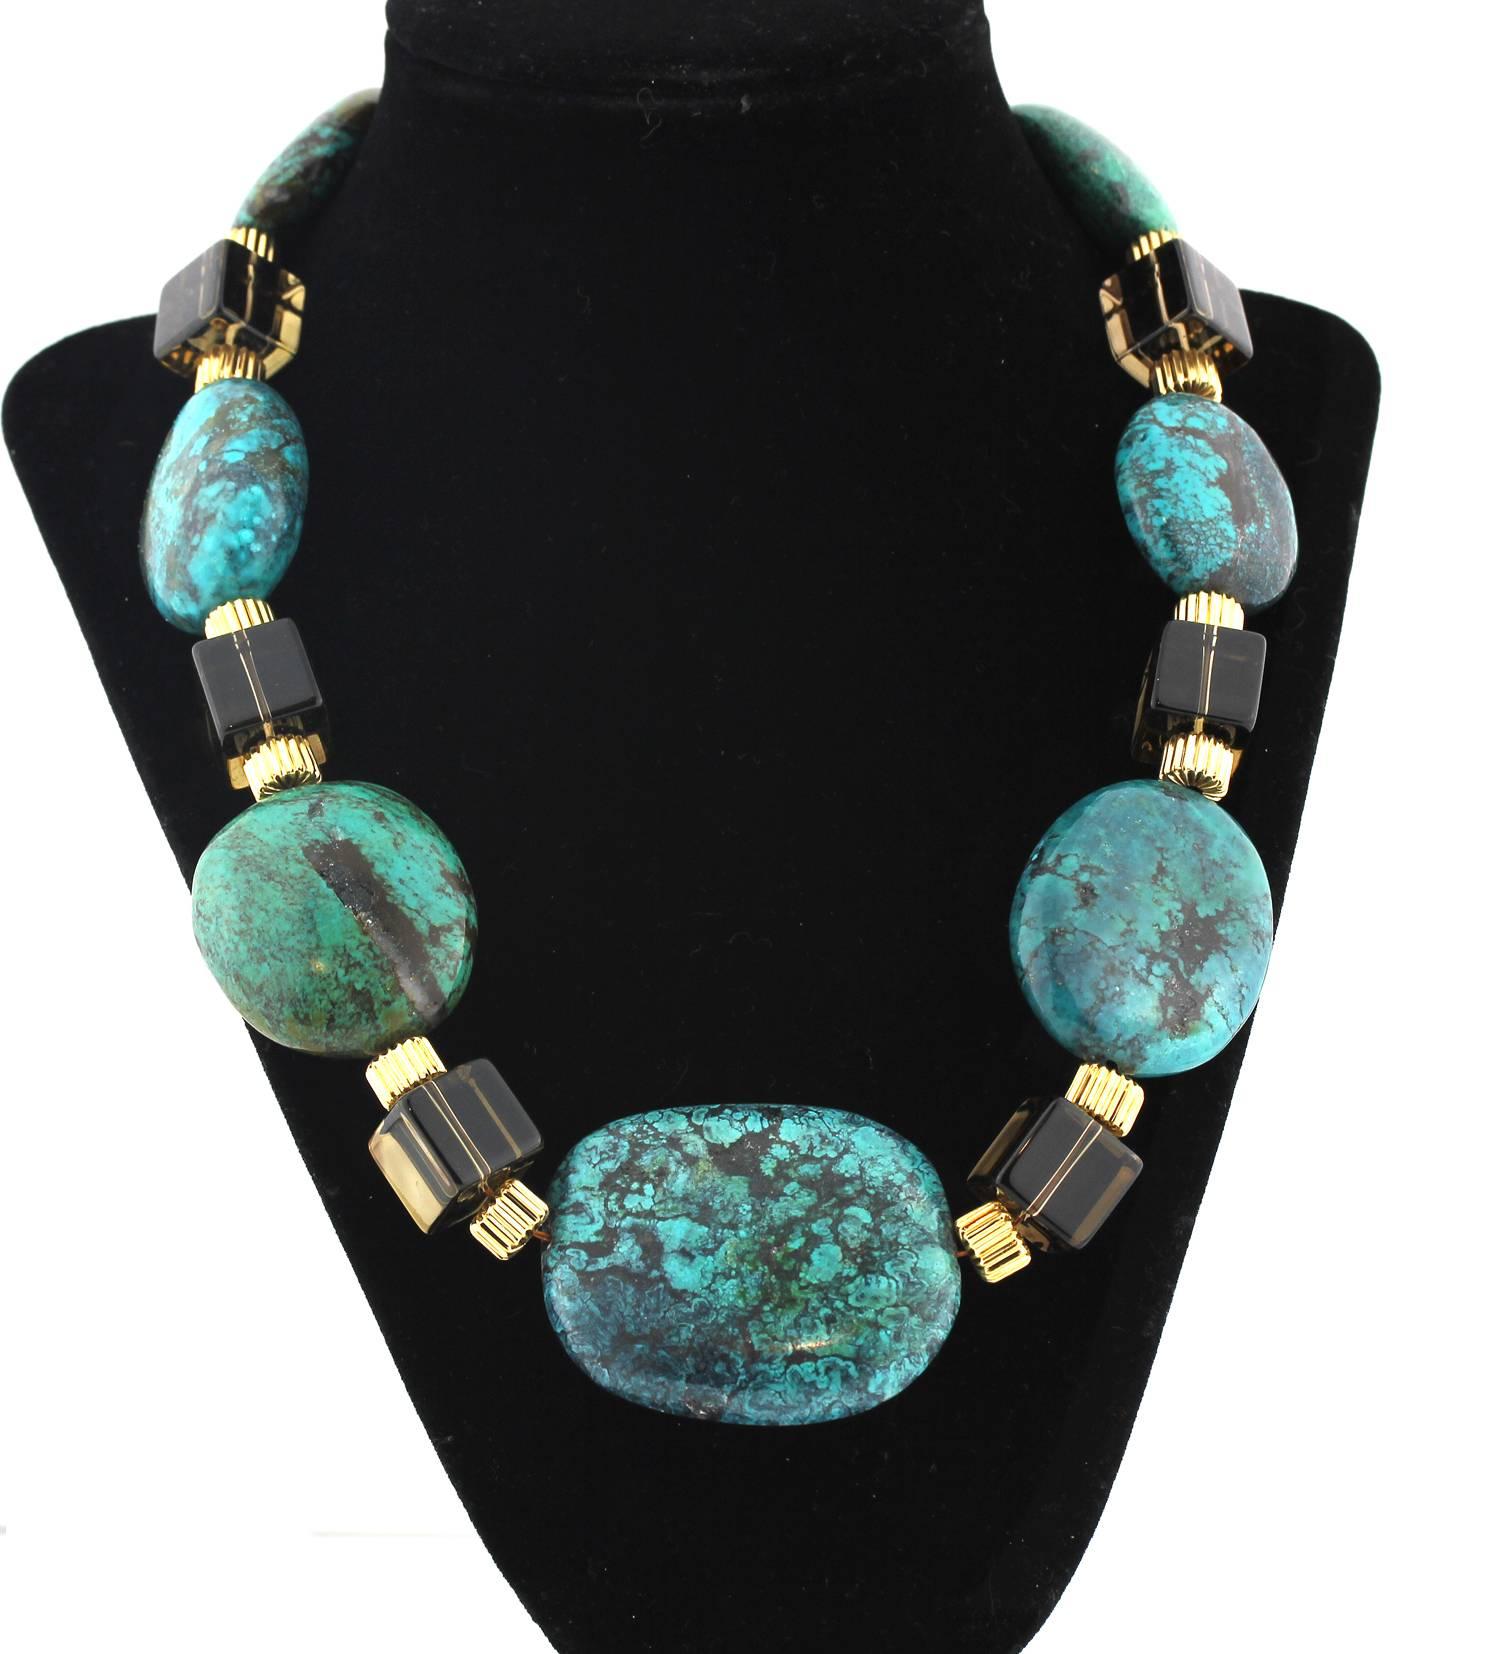 Necklace of Intense unique blueish green Turquoise enhanced with Smoky Quartz cubes and gold tone accents handmade necklace.
Size:  Turquoise varies up to 2 inches
Length:  20 inches
Clasp:  gold tone

